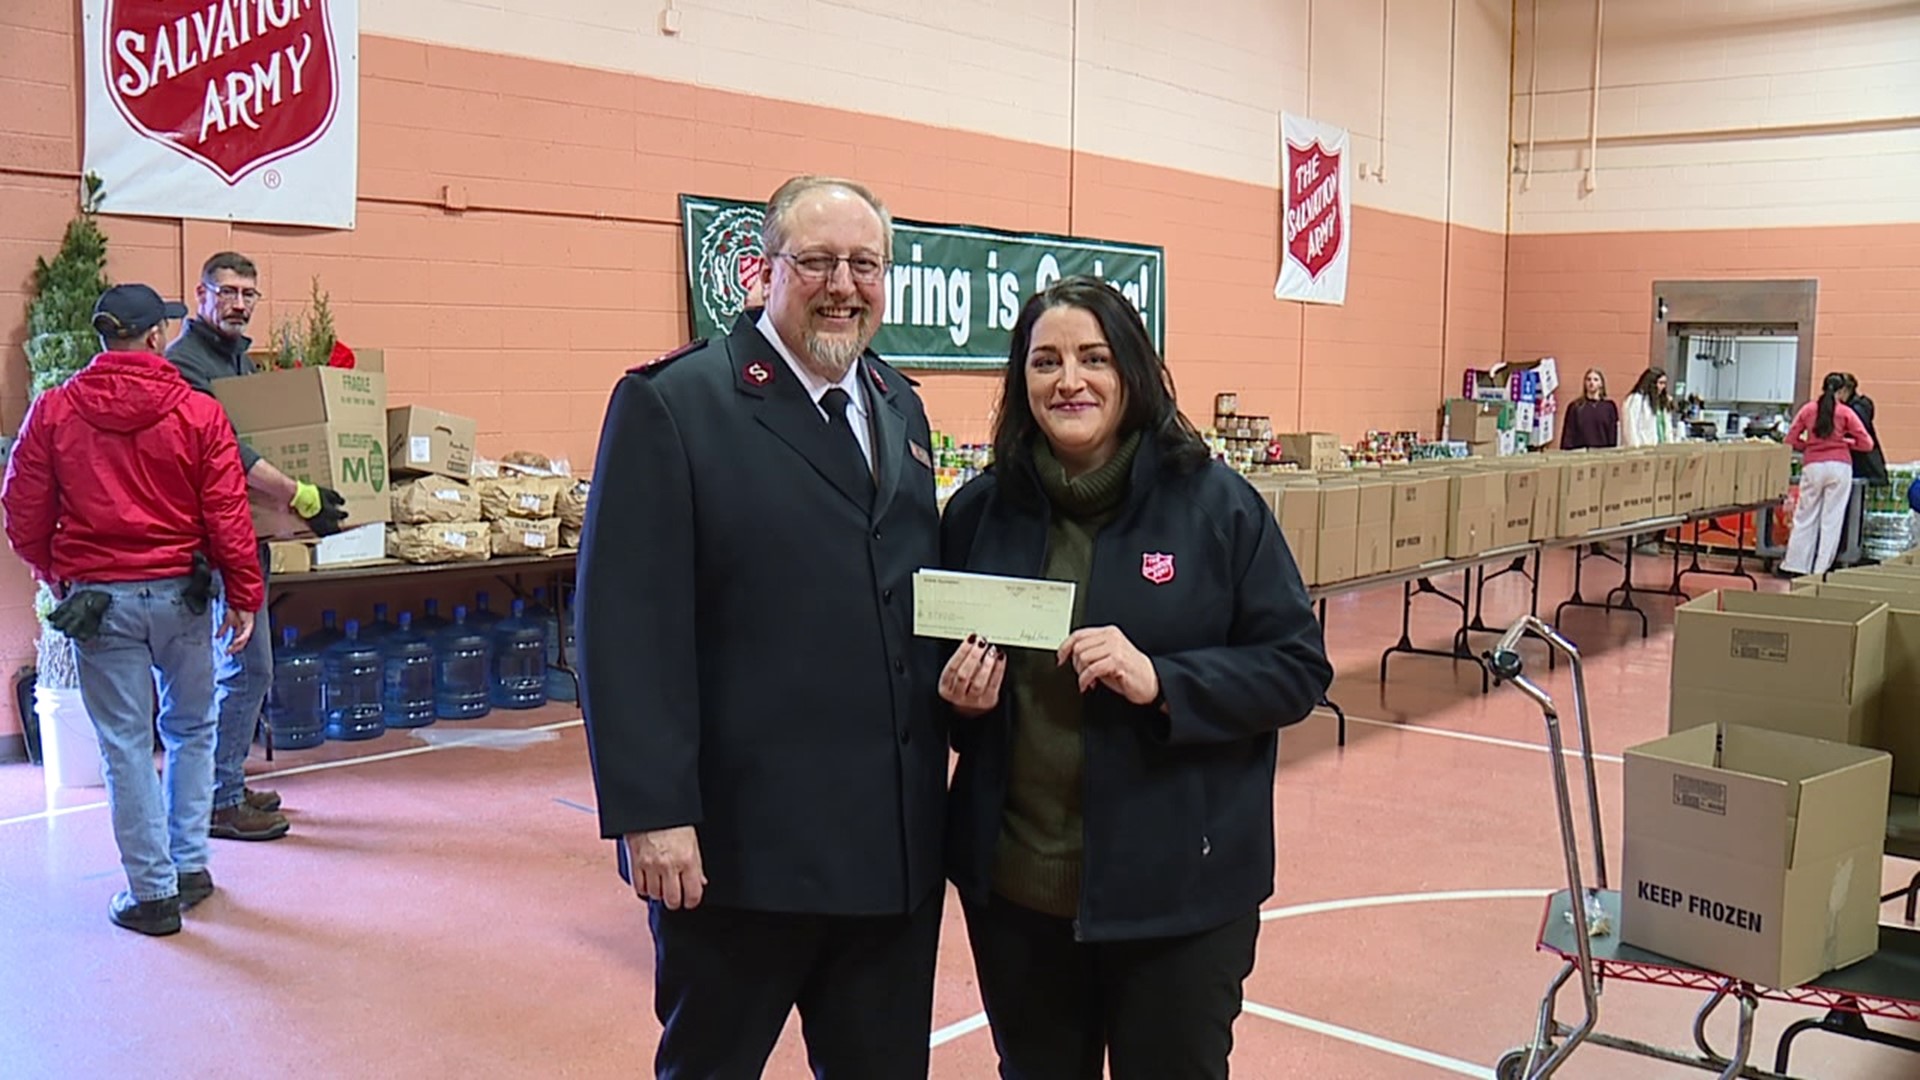 The TEGNA Foundation presented the Salvation Army with a donation of $2,500 on Thursday.